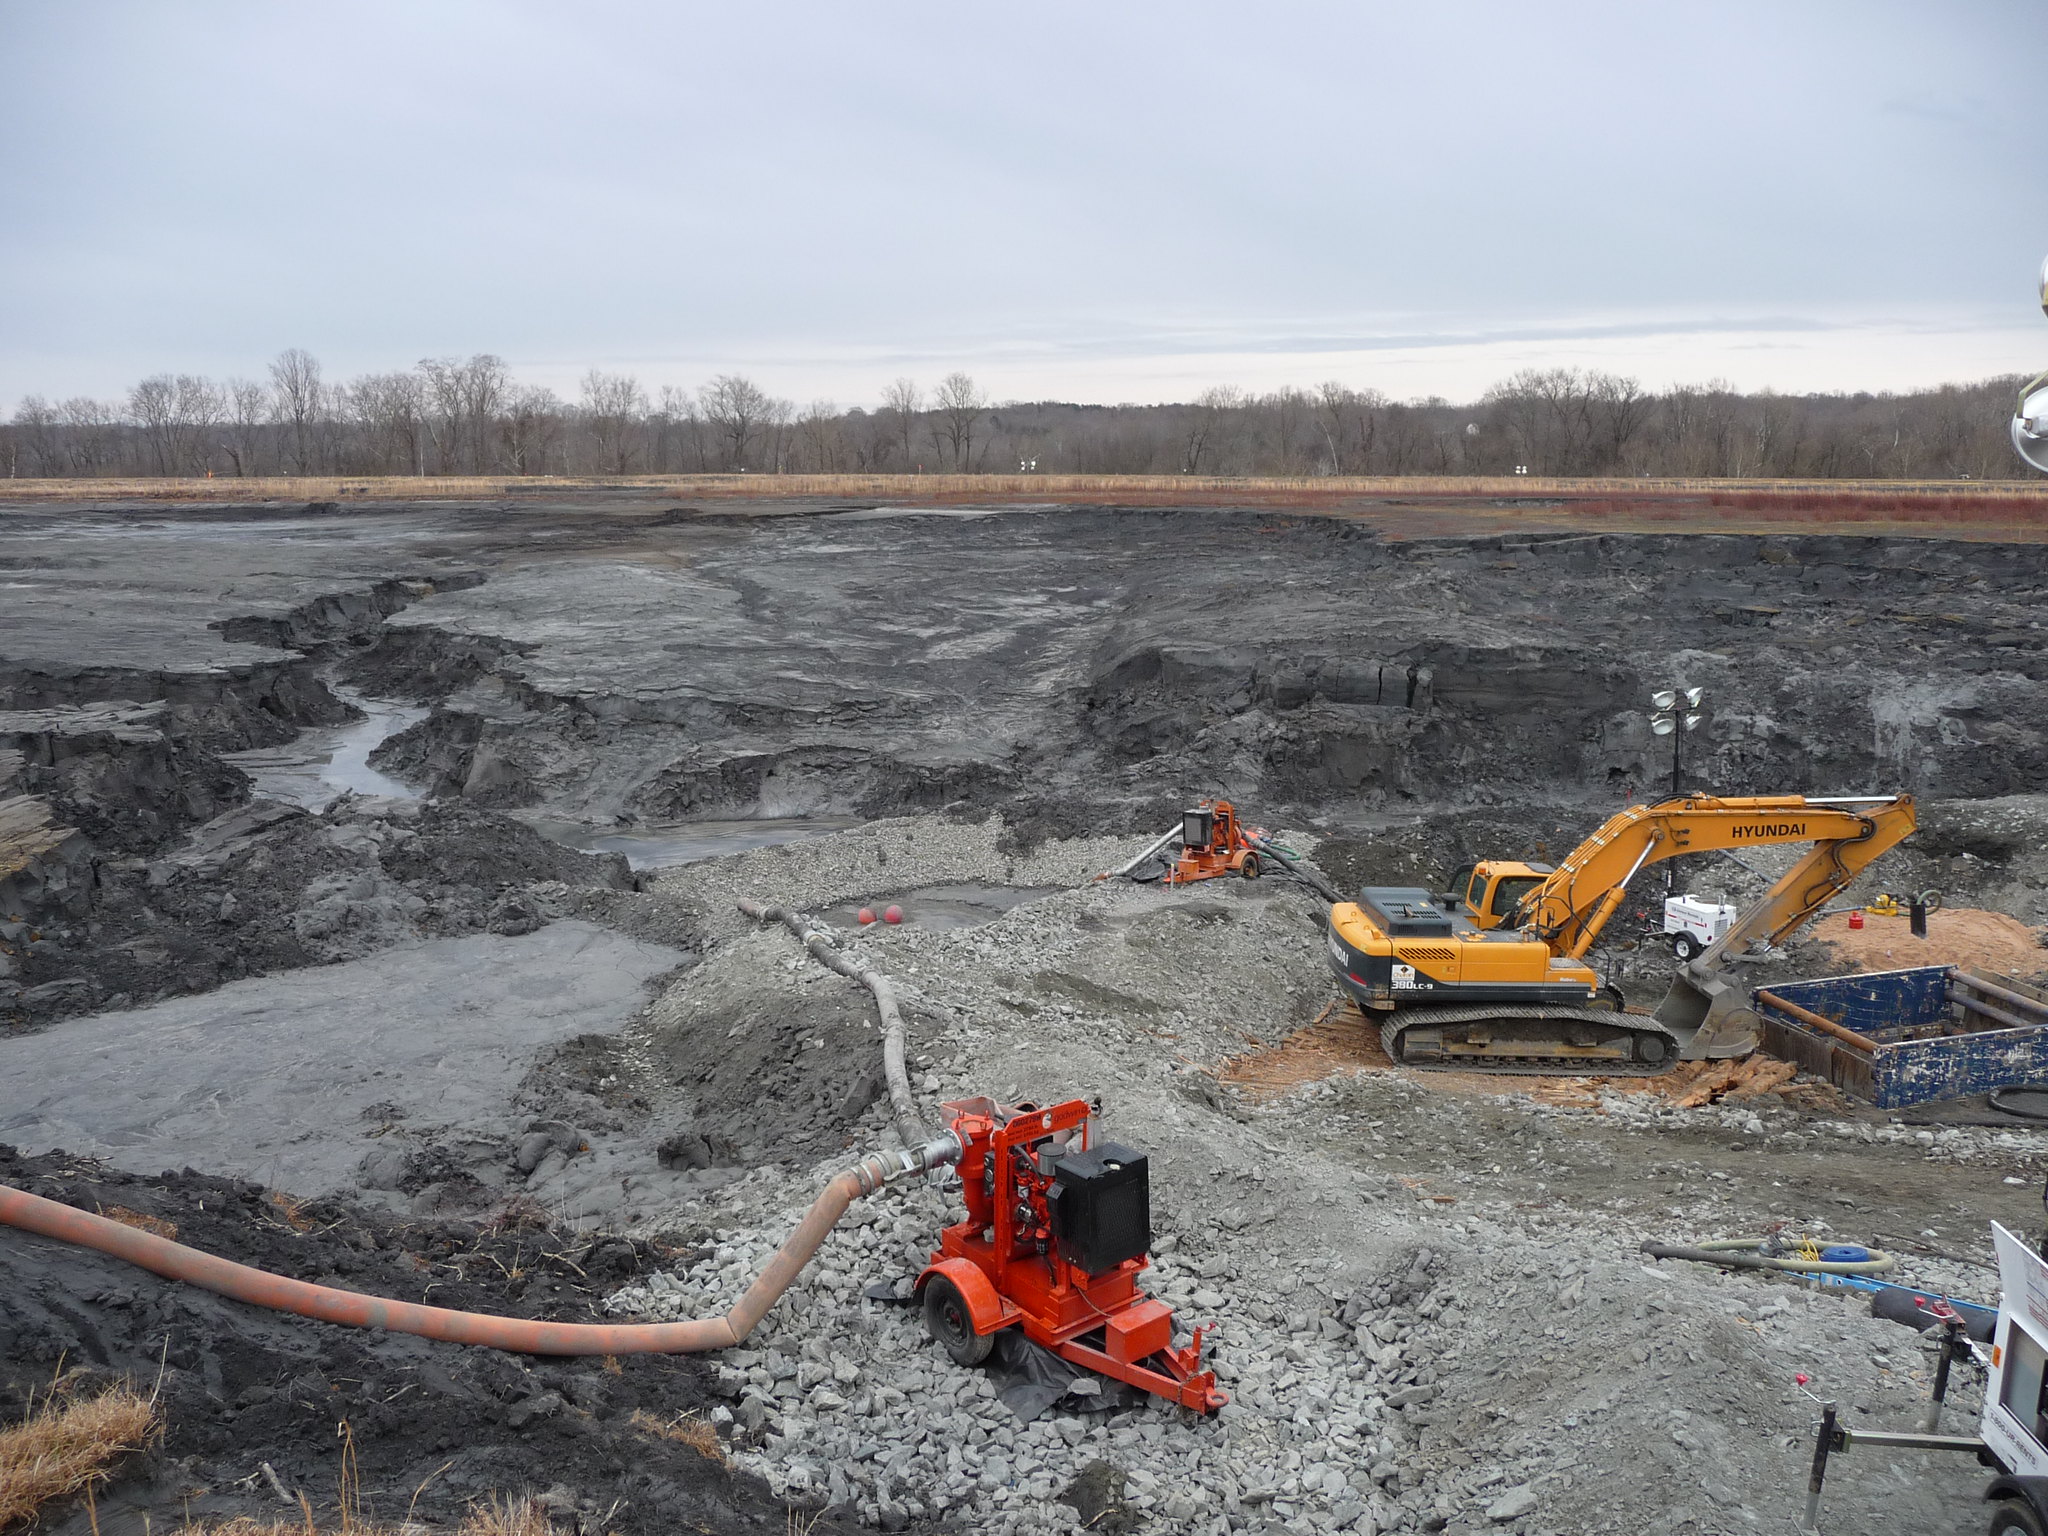 An excavator and other equipment cleaning up the Dan River coal ash spill in North Carolina in 2014.